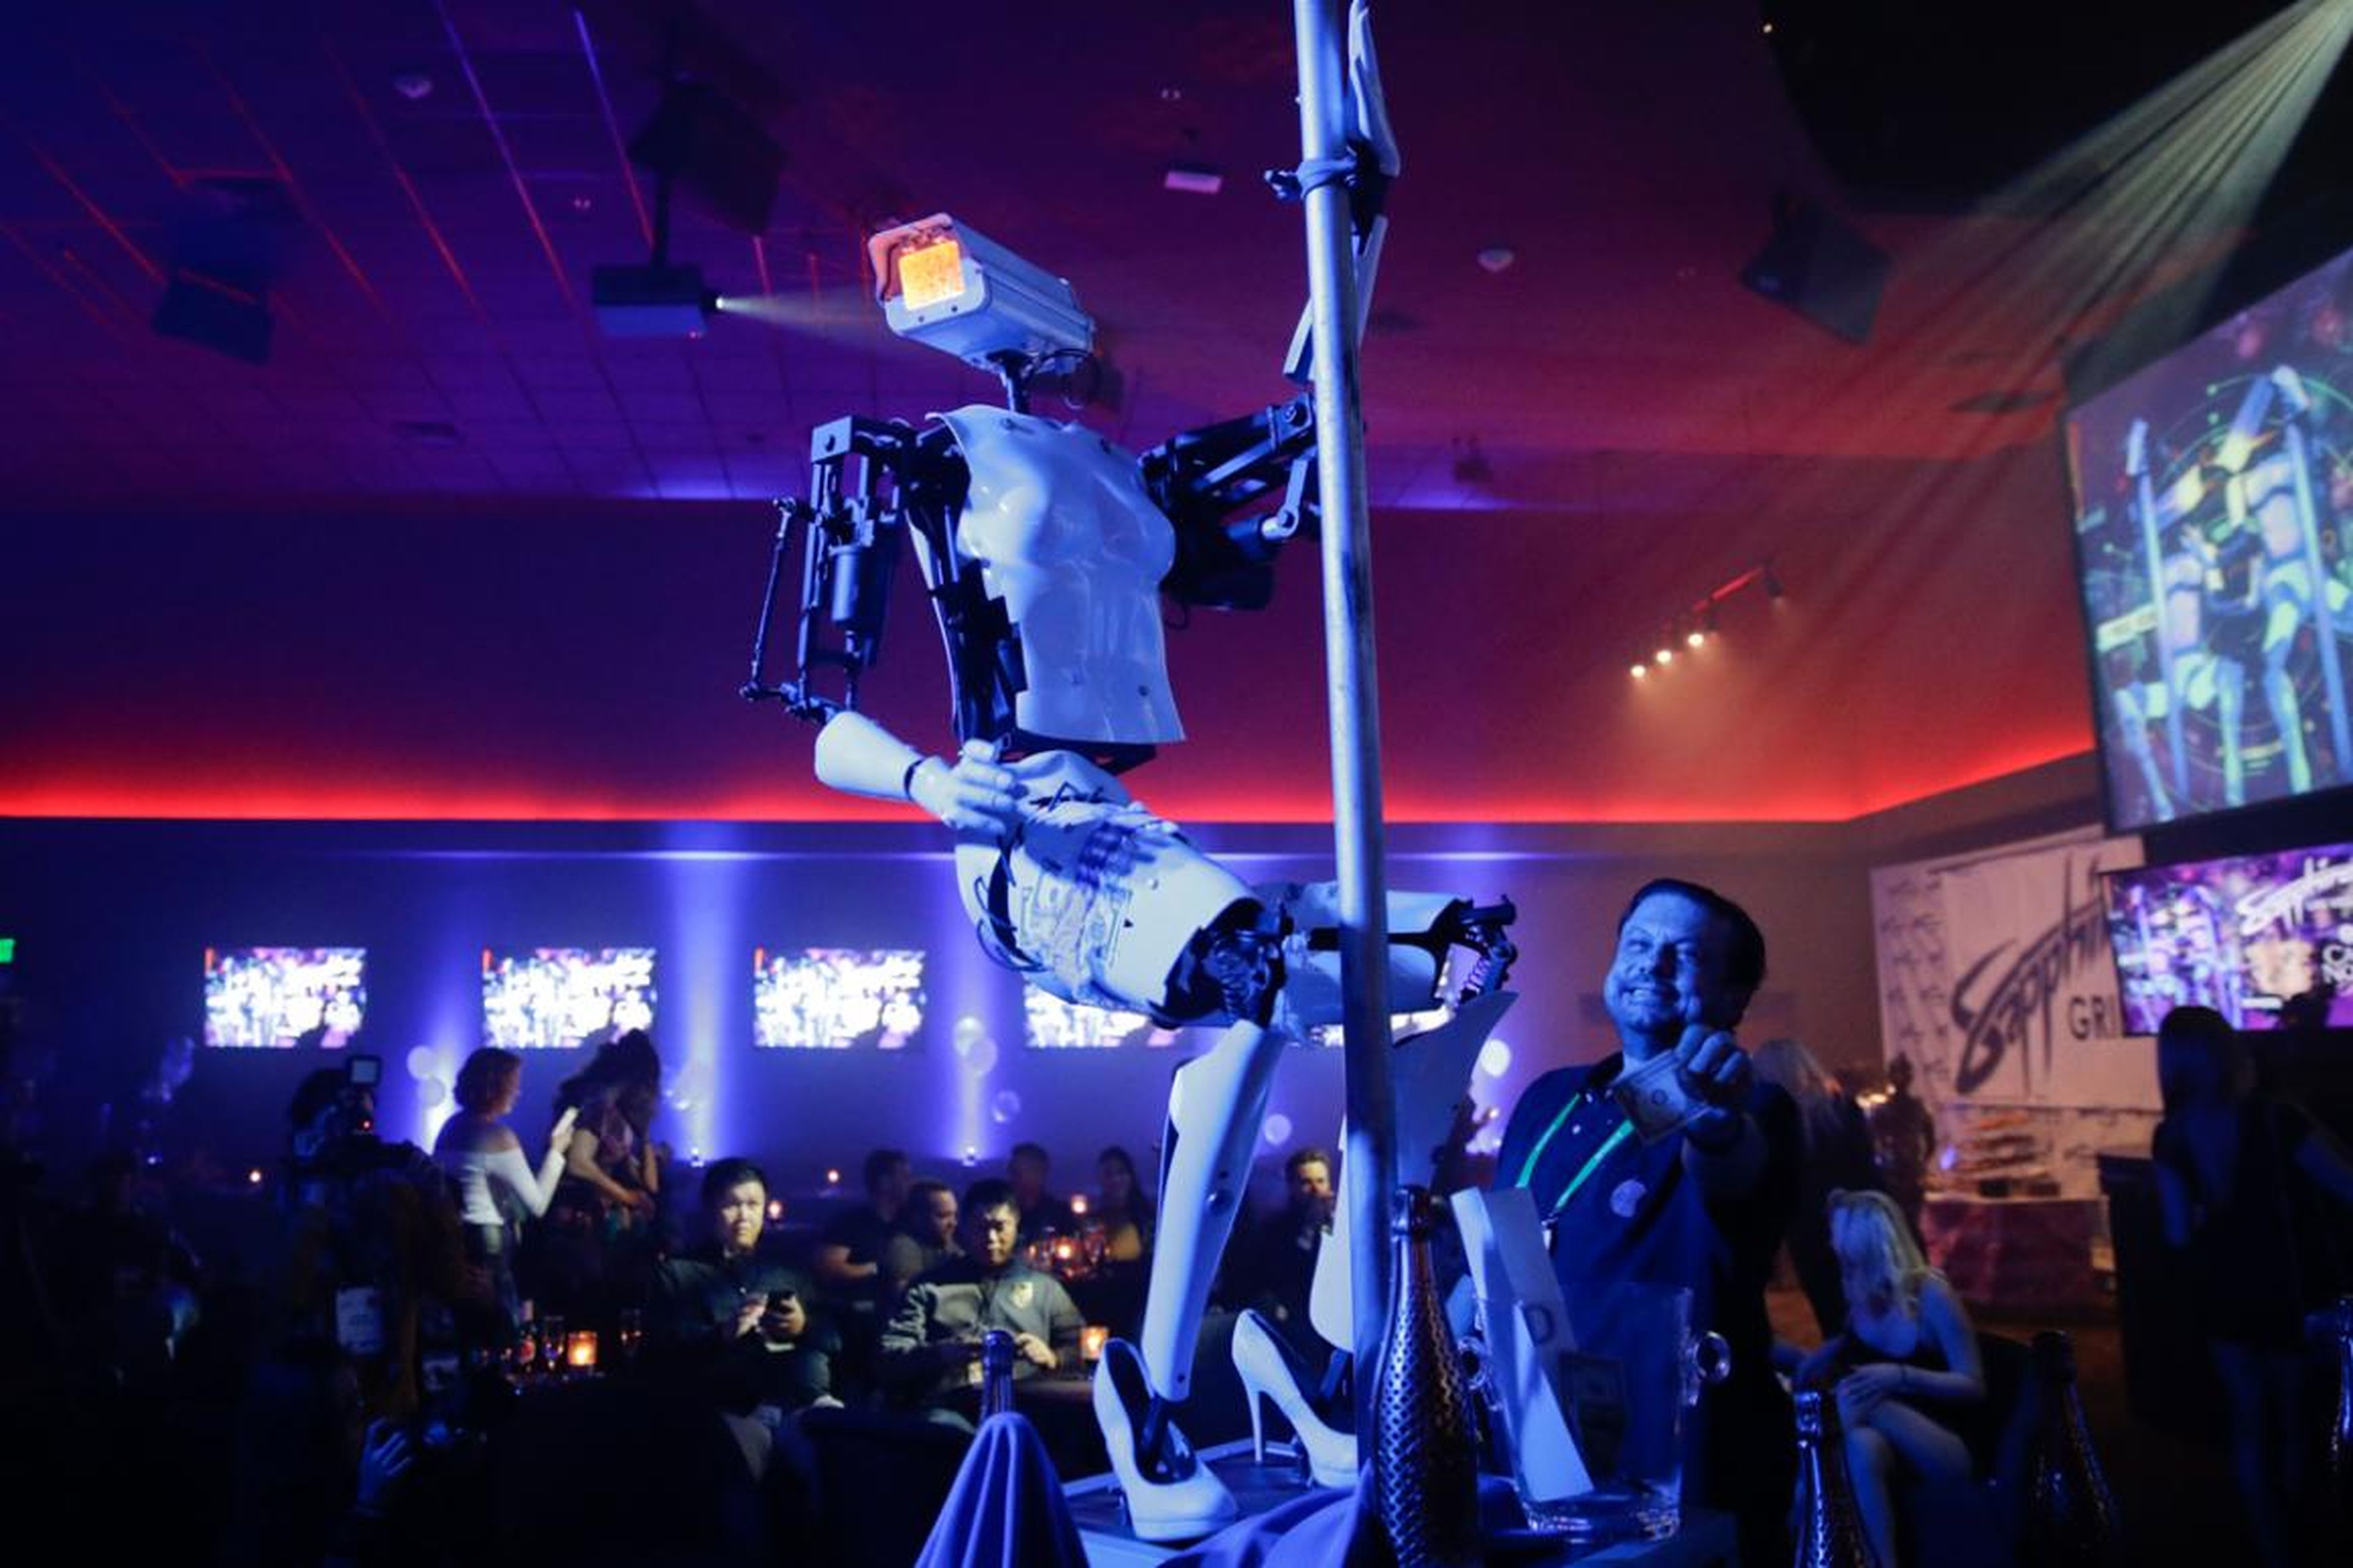 And because who could forget, here's the pole-dancing robot from CES 2018.